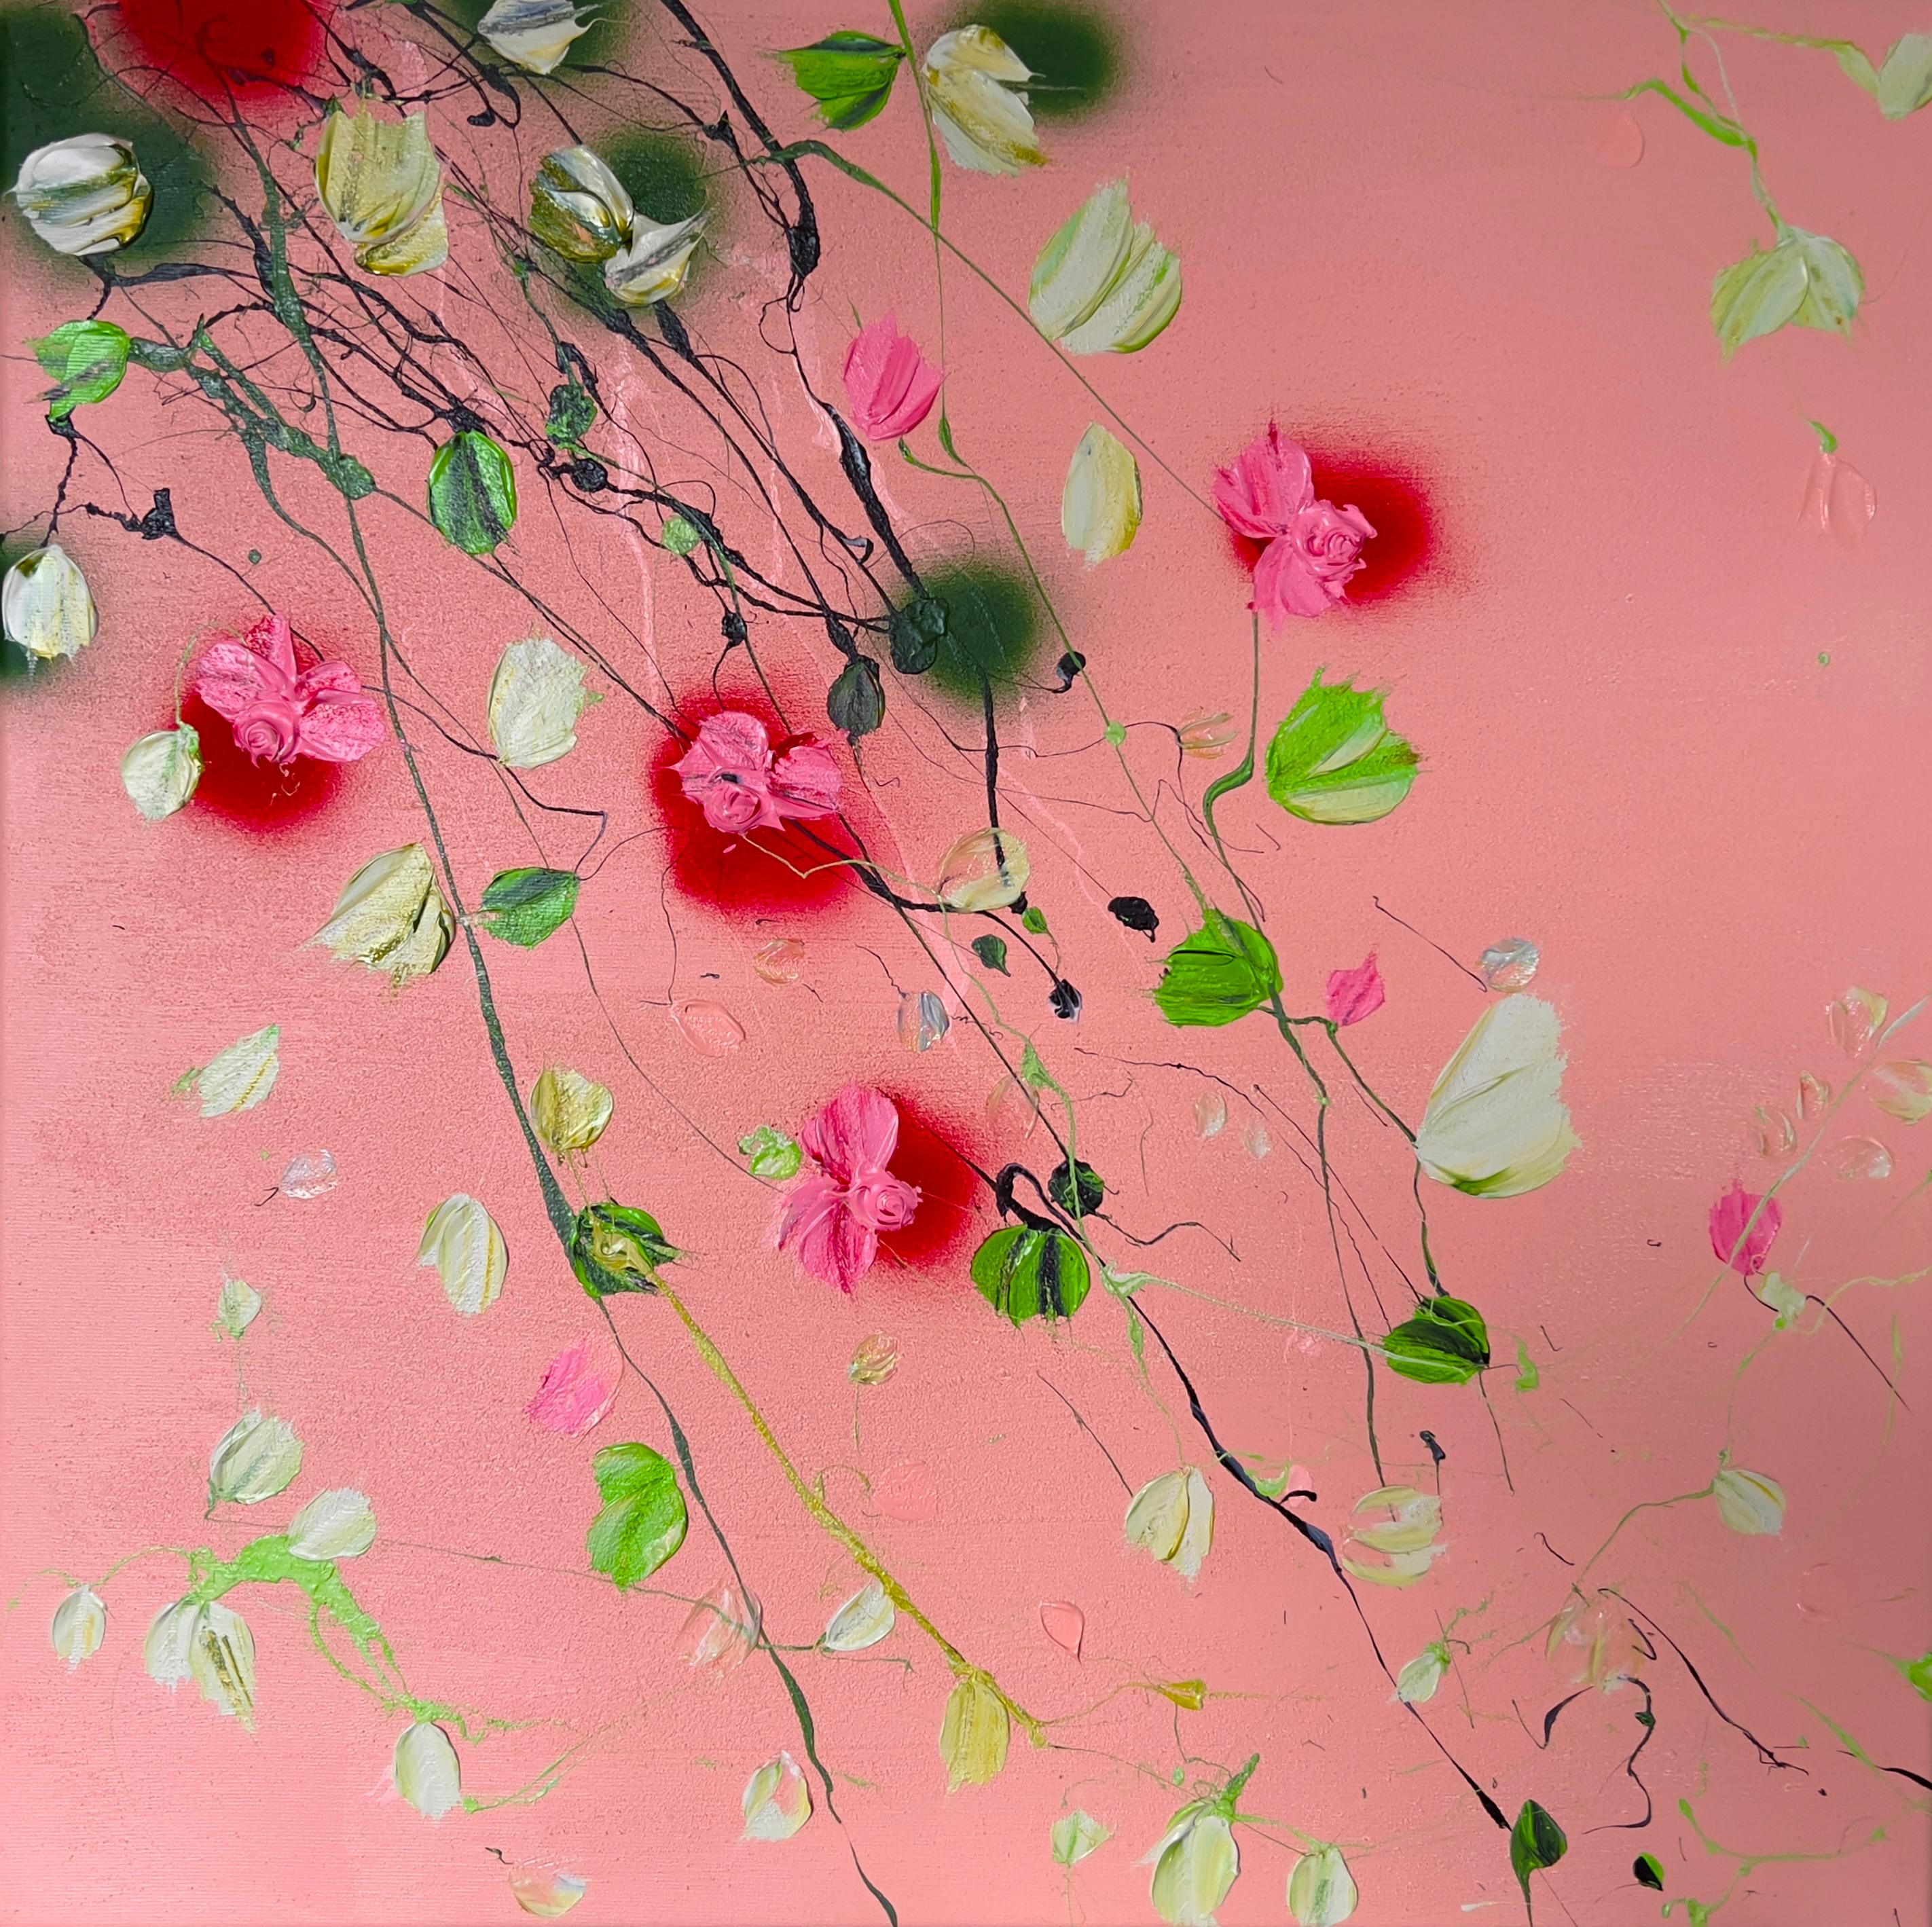 Anastassia Skopp Interior Painting - Textured colorfull floral painting "Rose Day II"